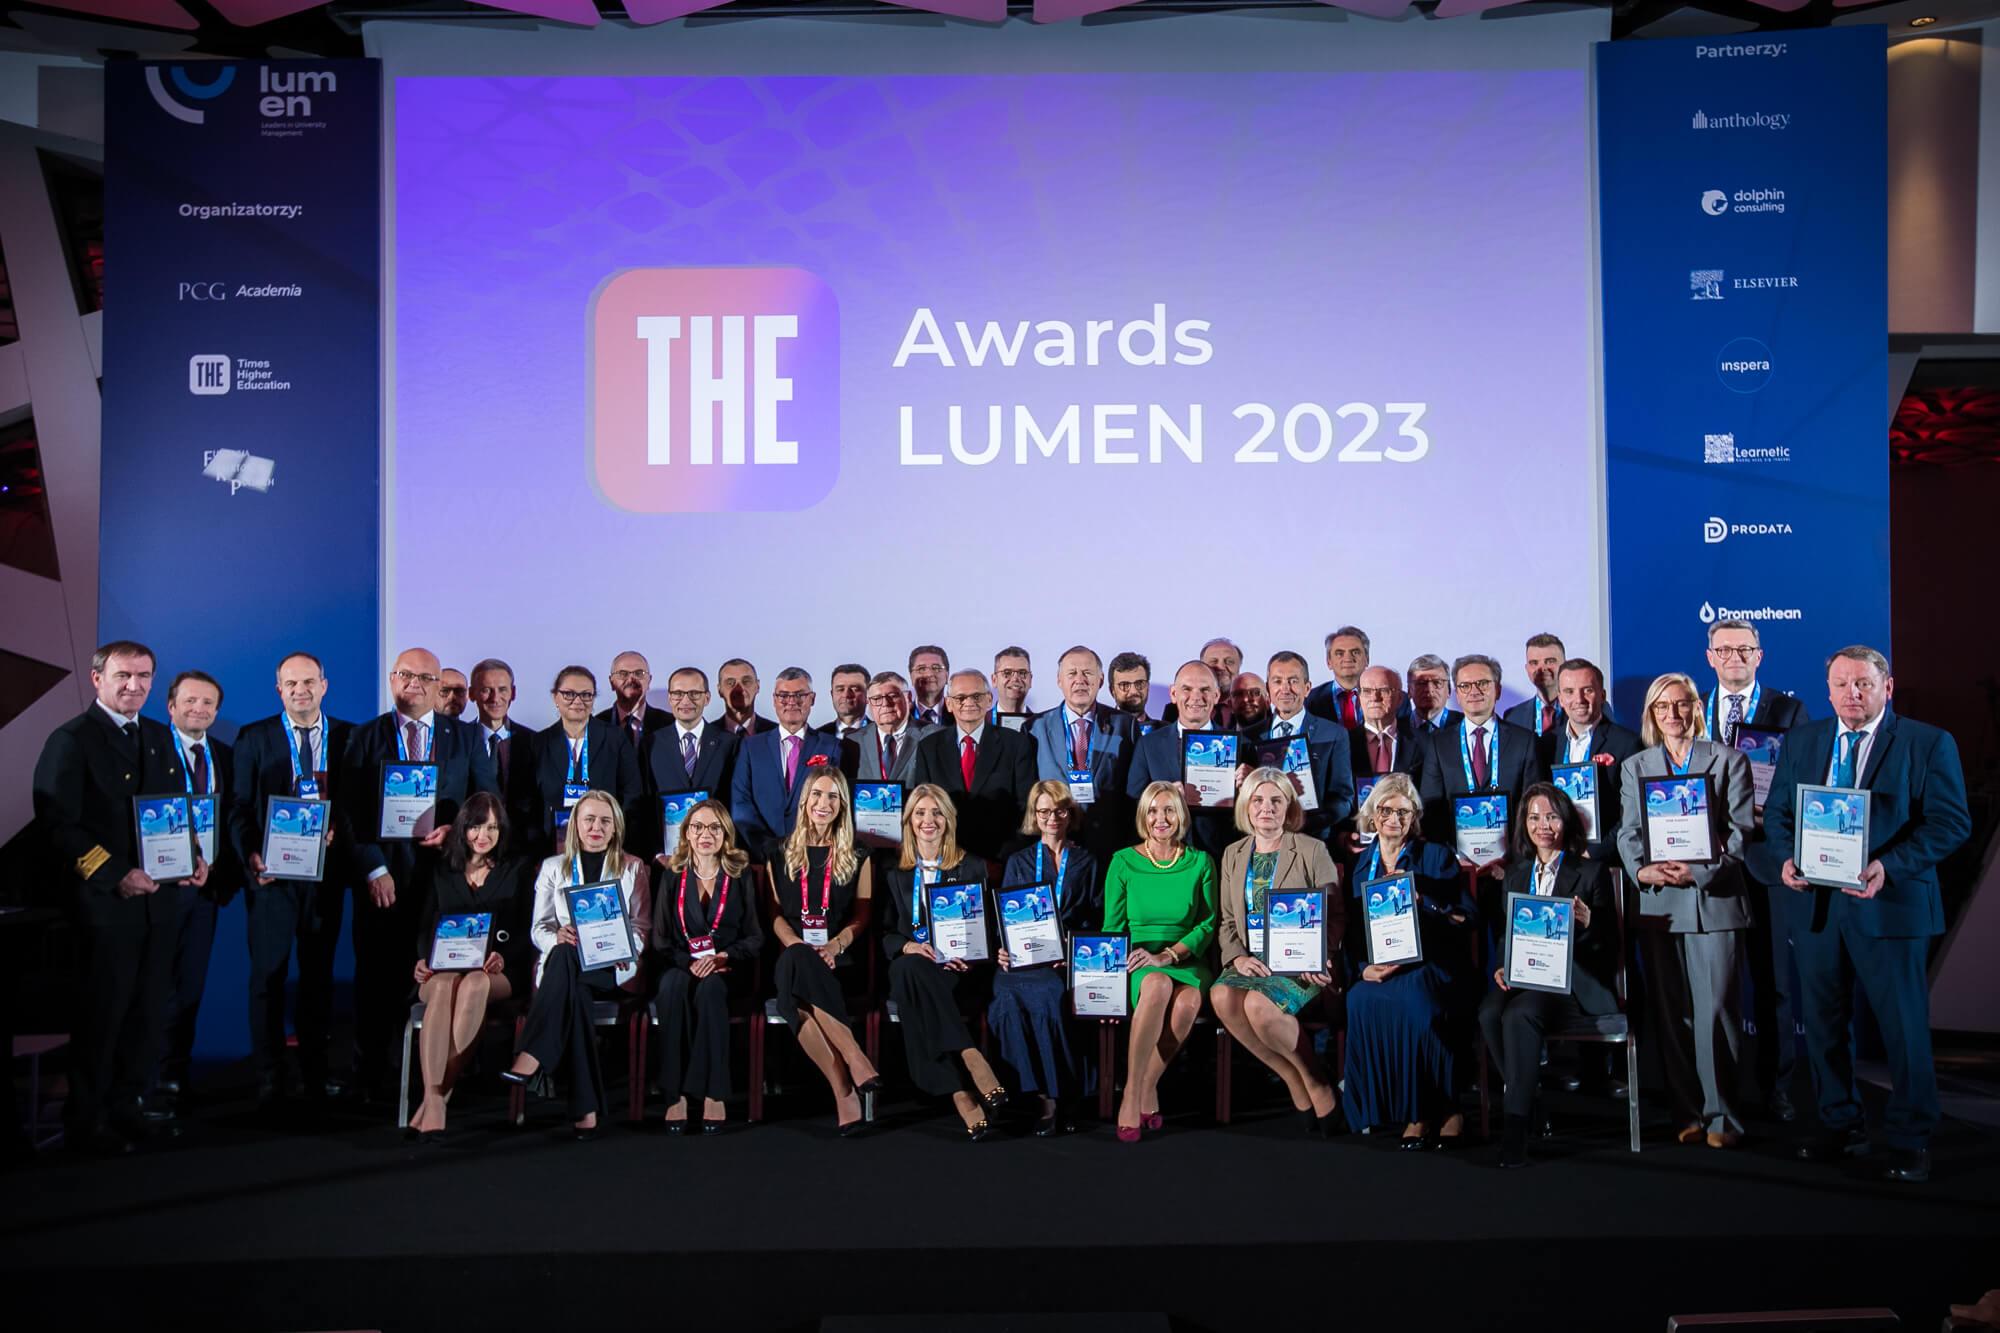 Rectors of all universities awarded the Times Higher Education Award at LUMEN Conference 2023